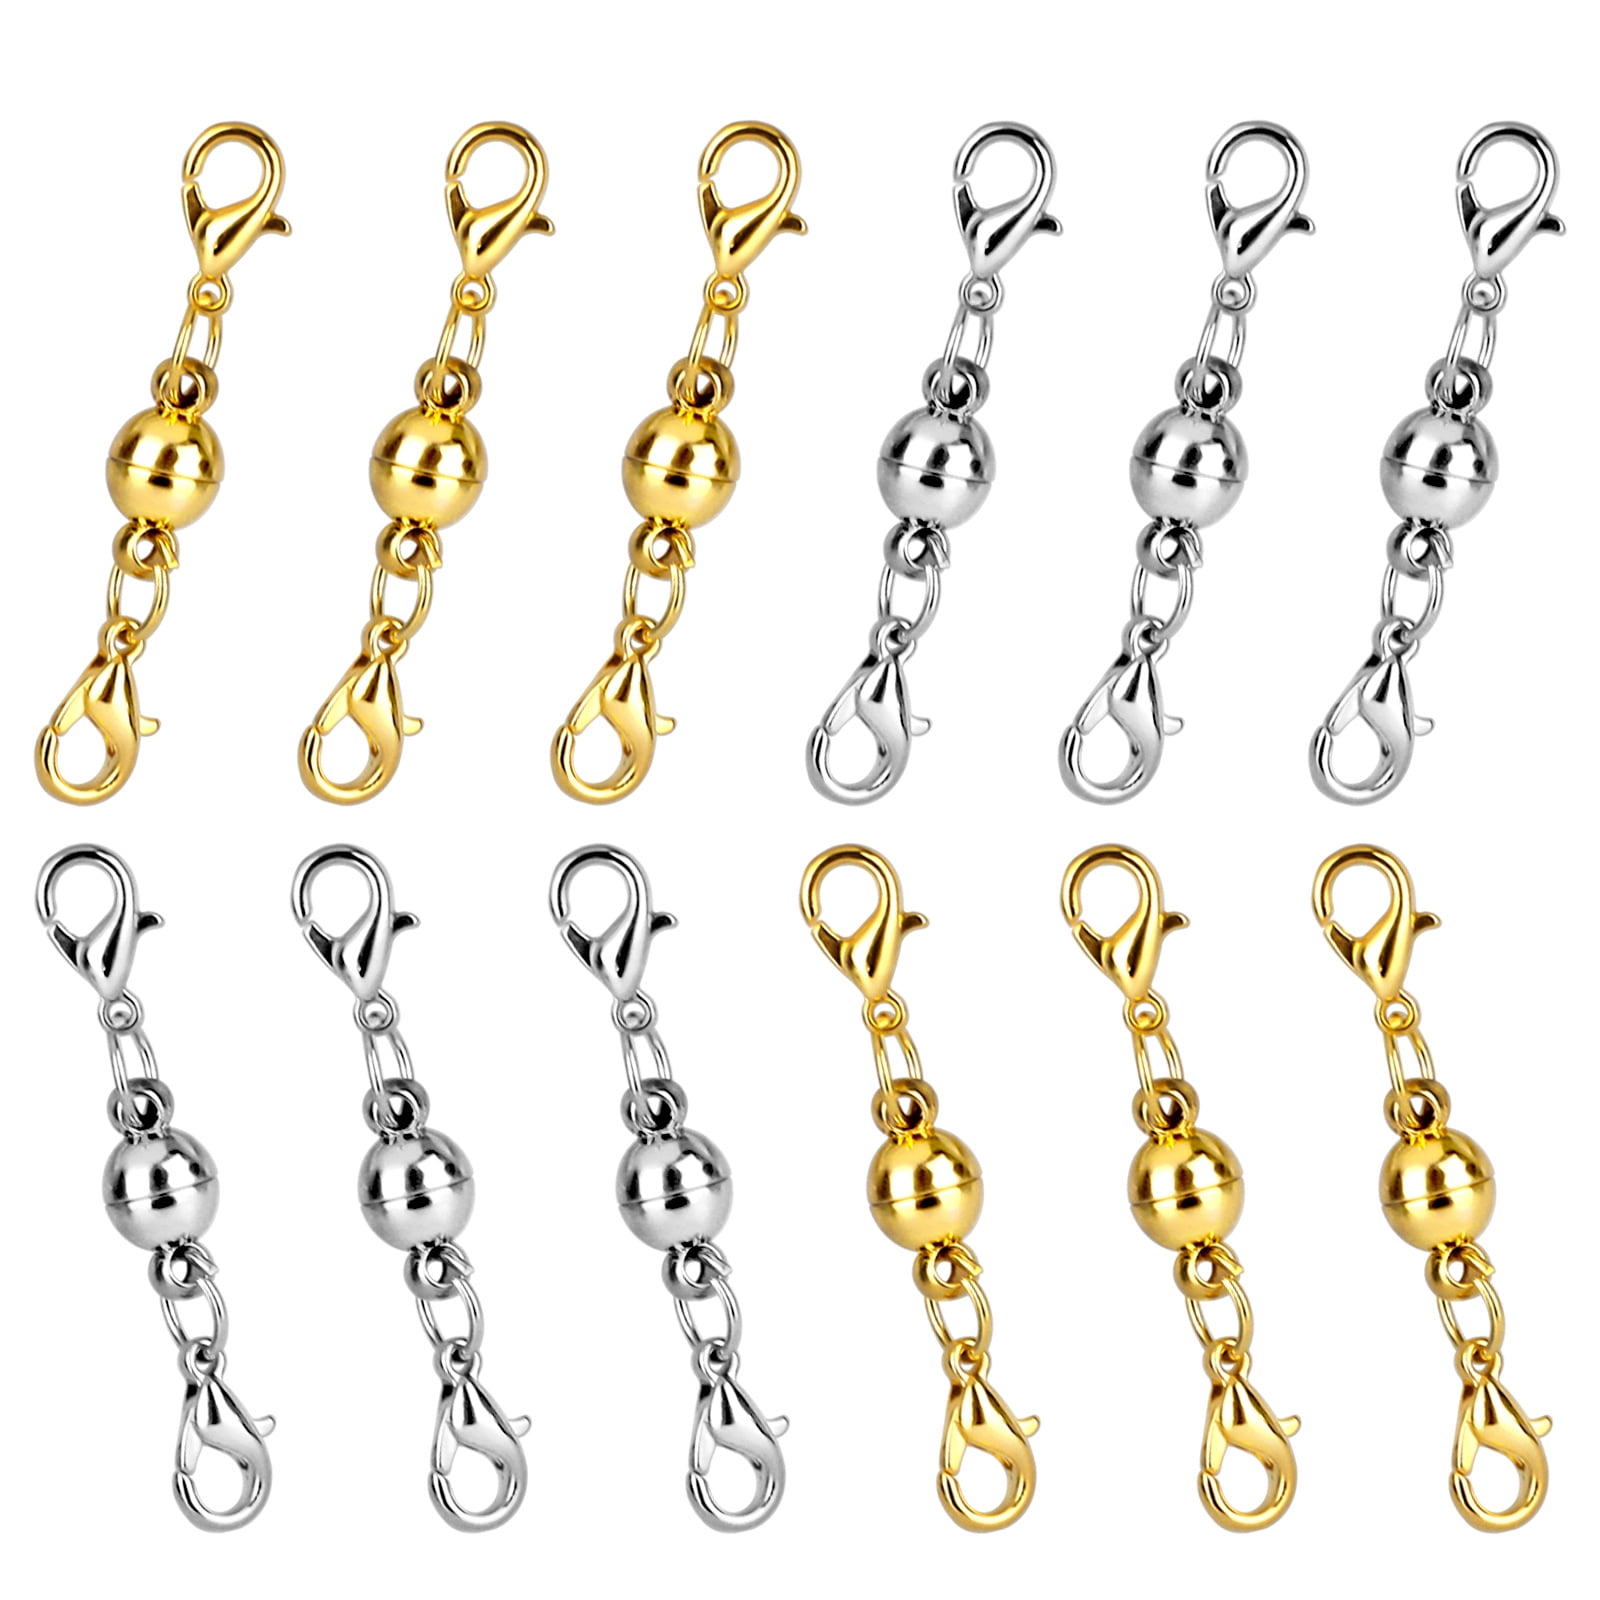 5x Silver Brass Magnetic Clasps Connector Jewelry Making Bracelet Findings 